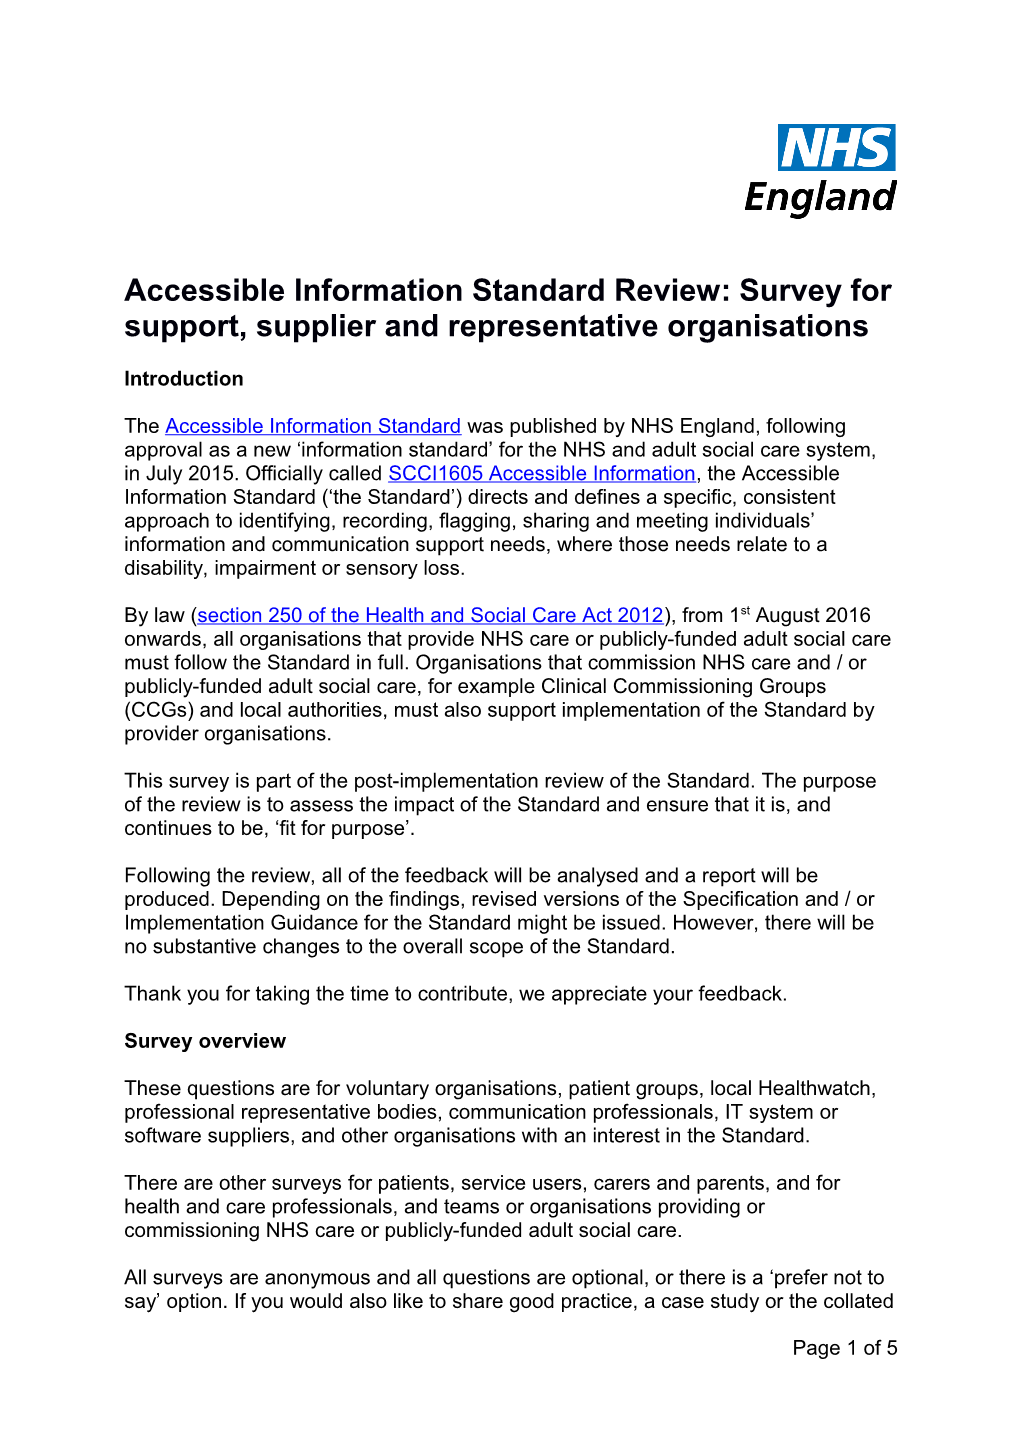 Accessible Information Standard Review: Survey for Support, Supplier and Representative